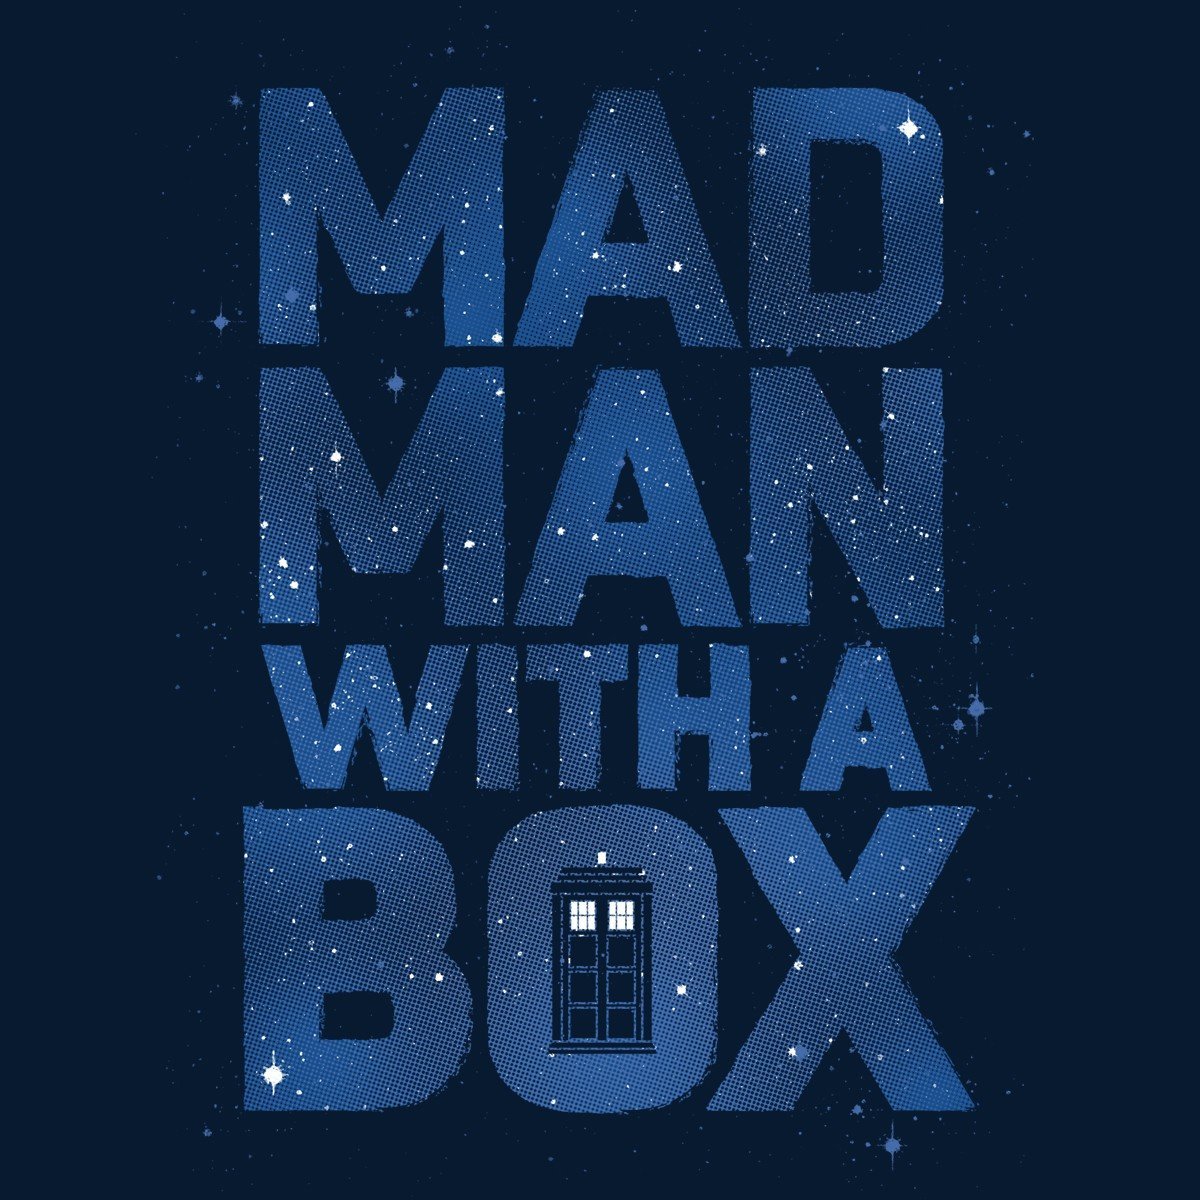 Who mad who. Мад ман. Mad man with a Box. 12th Doctor Mad. Waiting for a Mad man in a Blue Box.